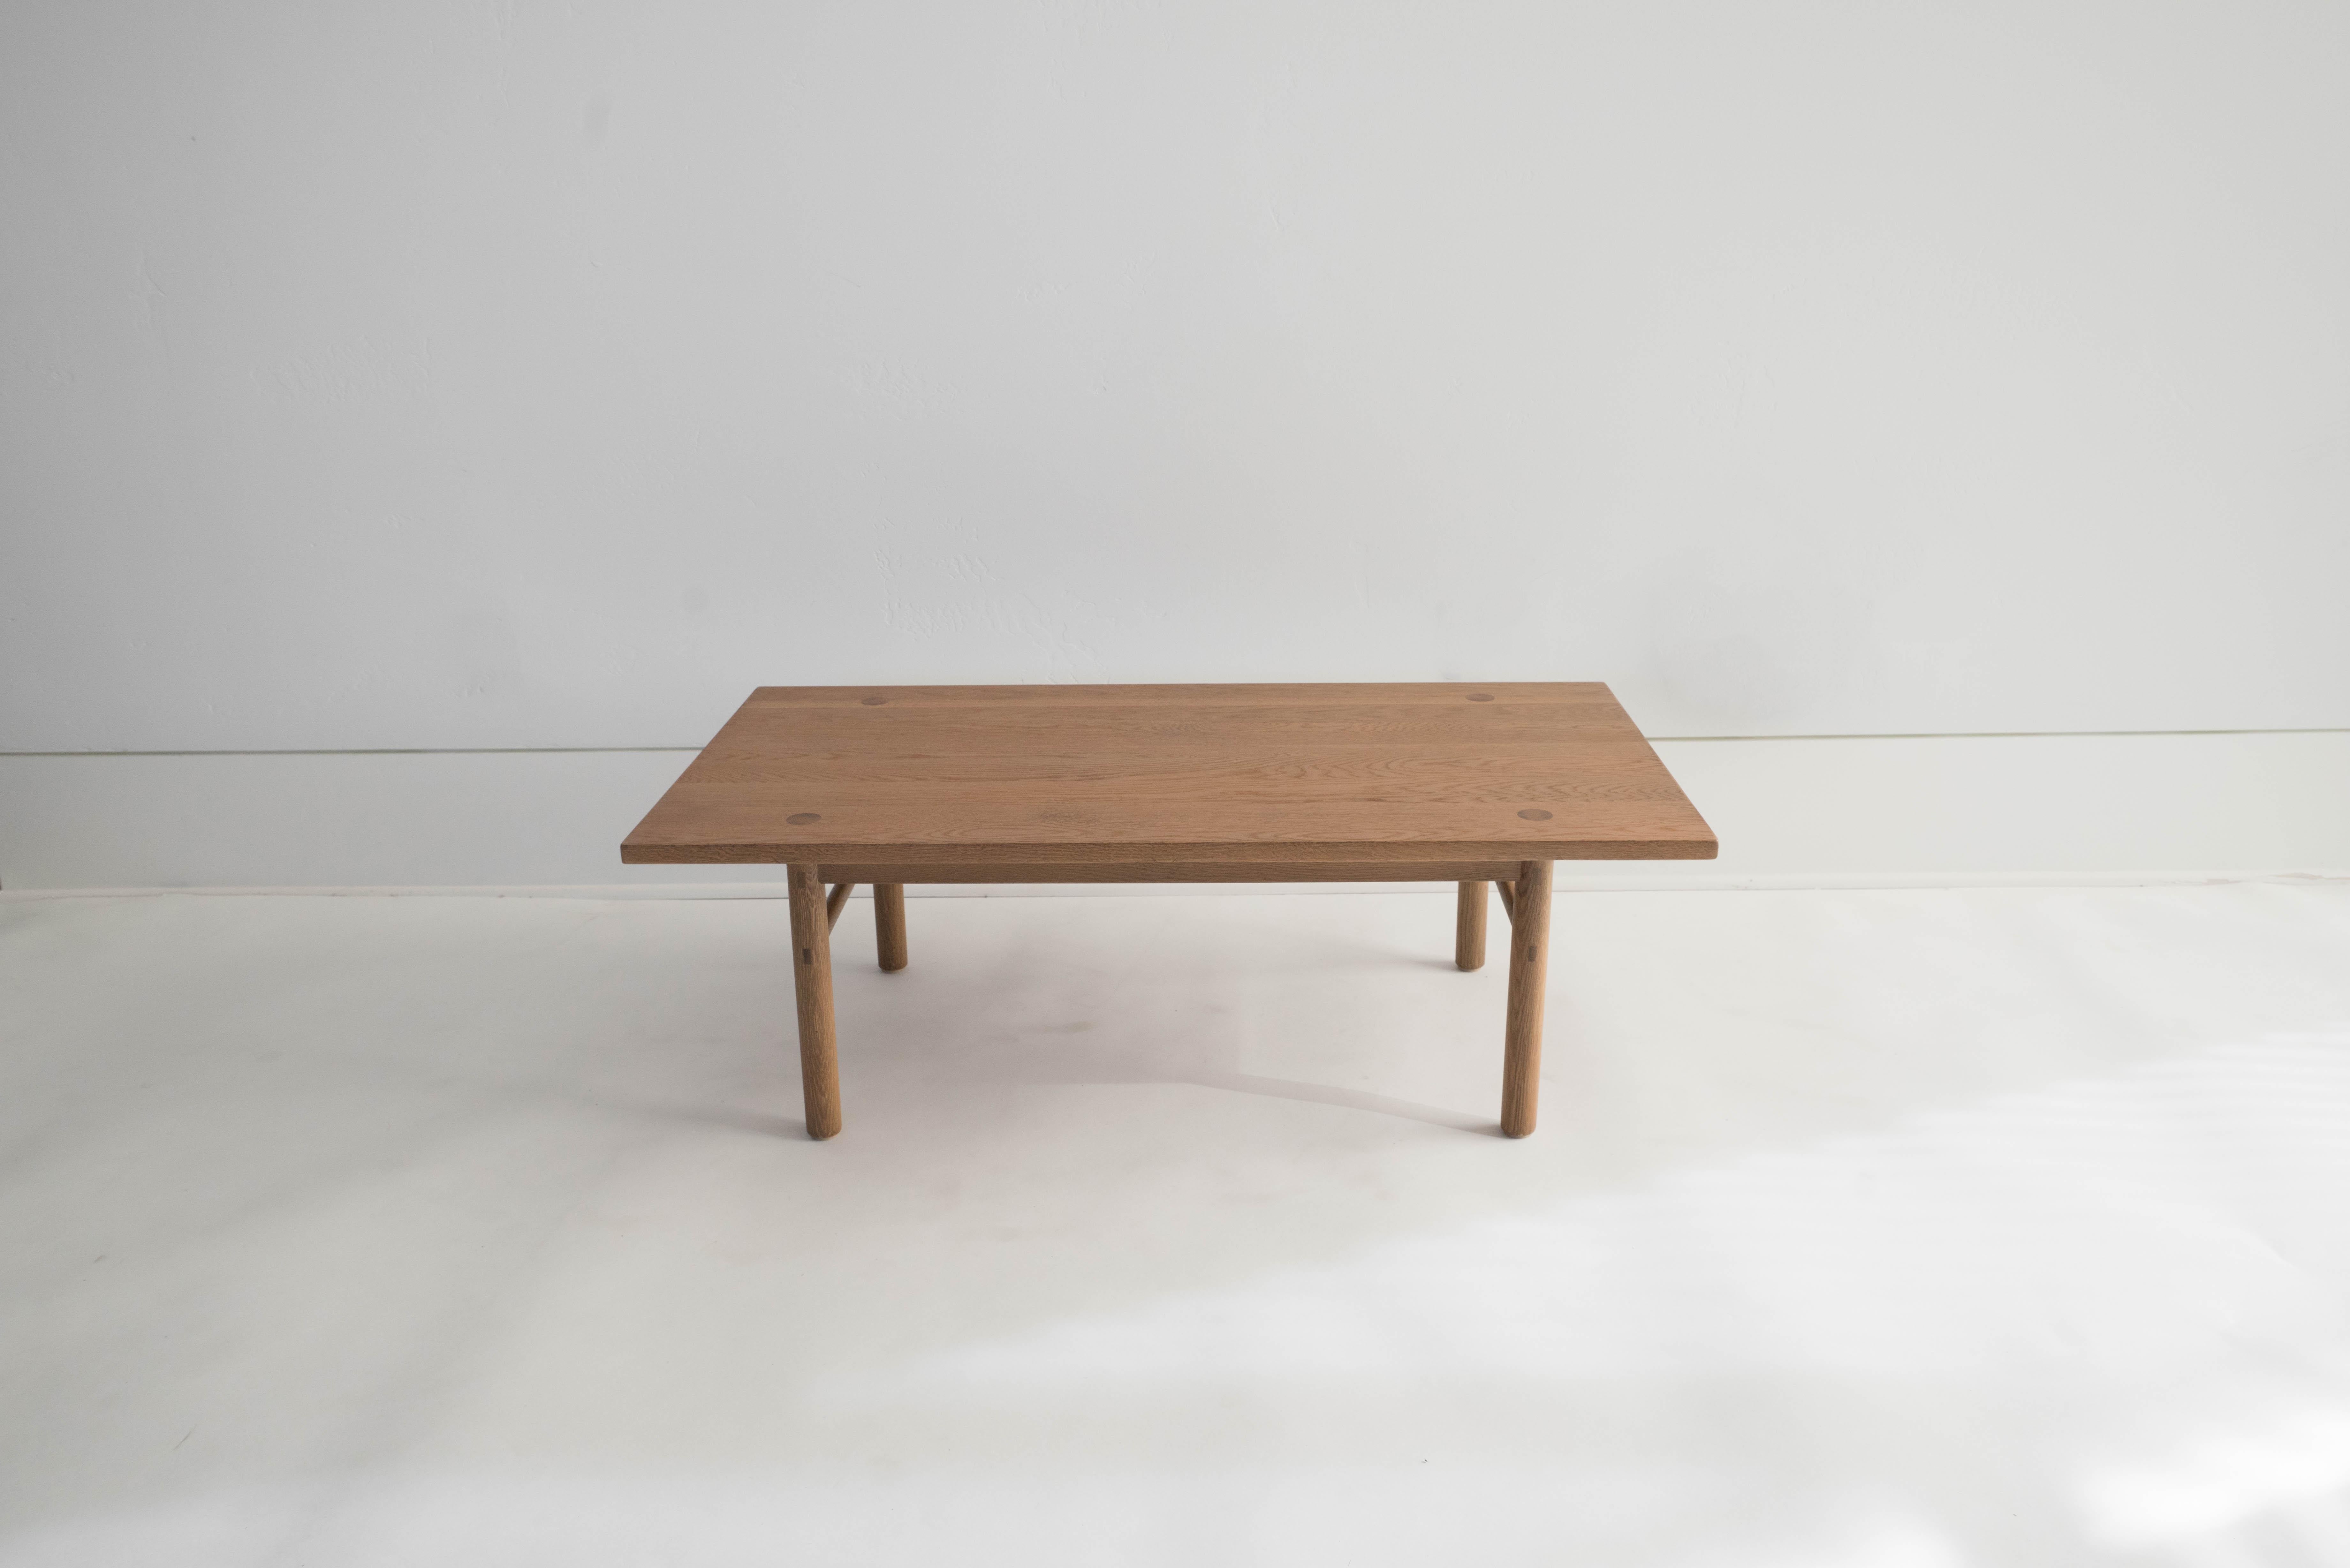 Sun at Six is a contemporary furniture design studio that works with traditional Chinese joinery masters to handcraft our pieces using traditional joinery. Our classic coffee table - simple, versatile, and functional. Tenna oil is hand